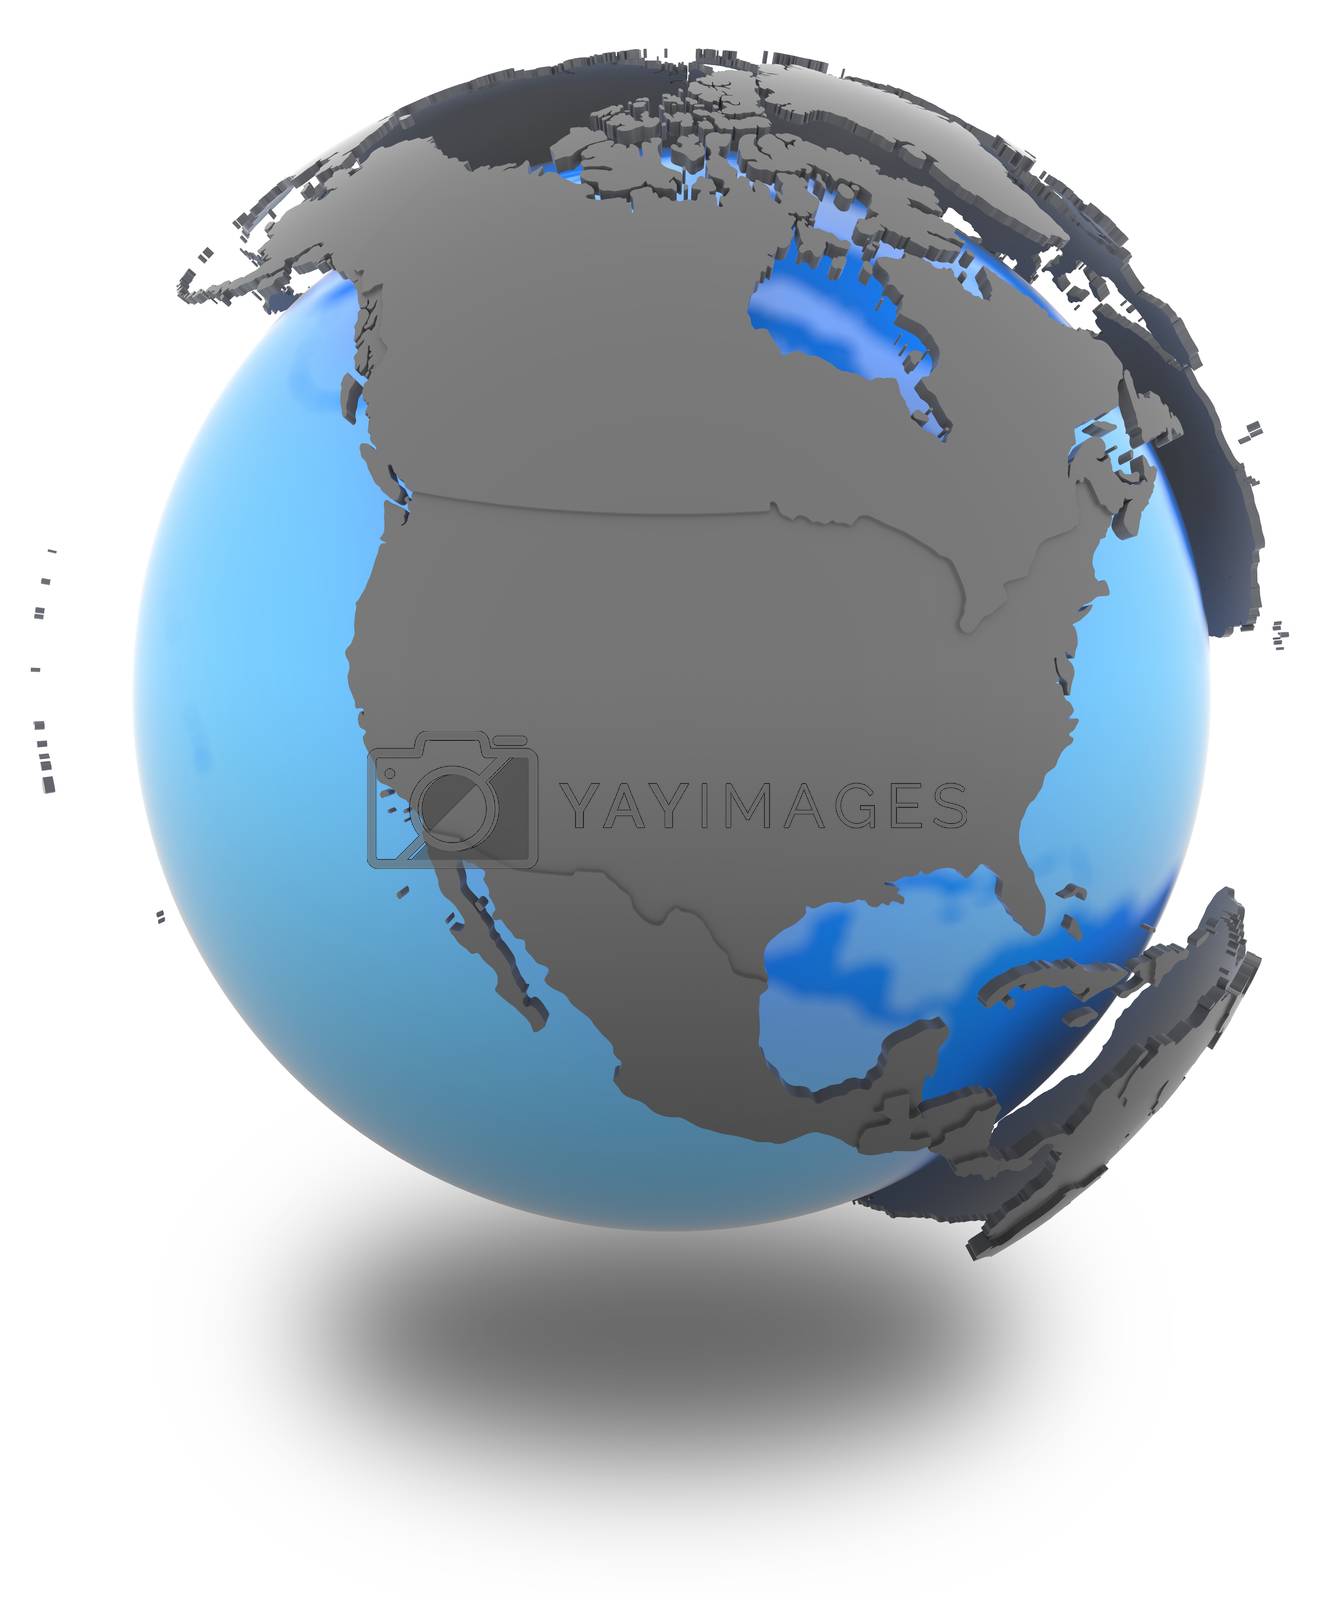 Royalty free image of North America on Earth by Harvepino